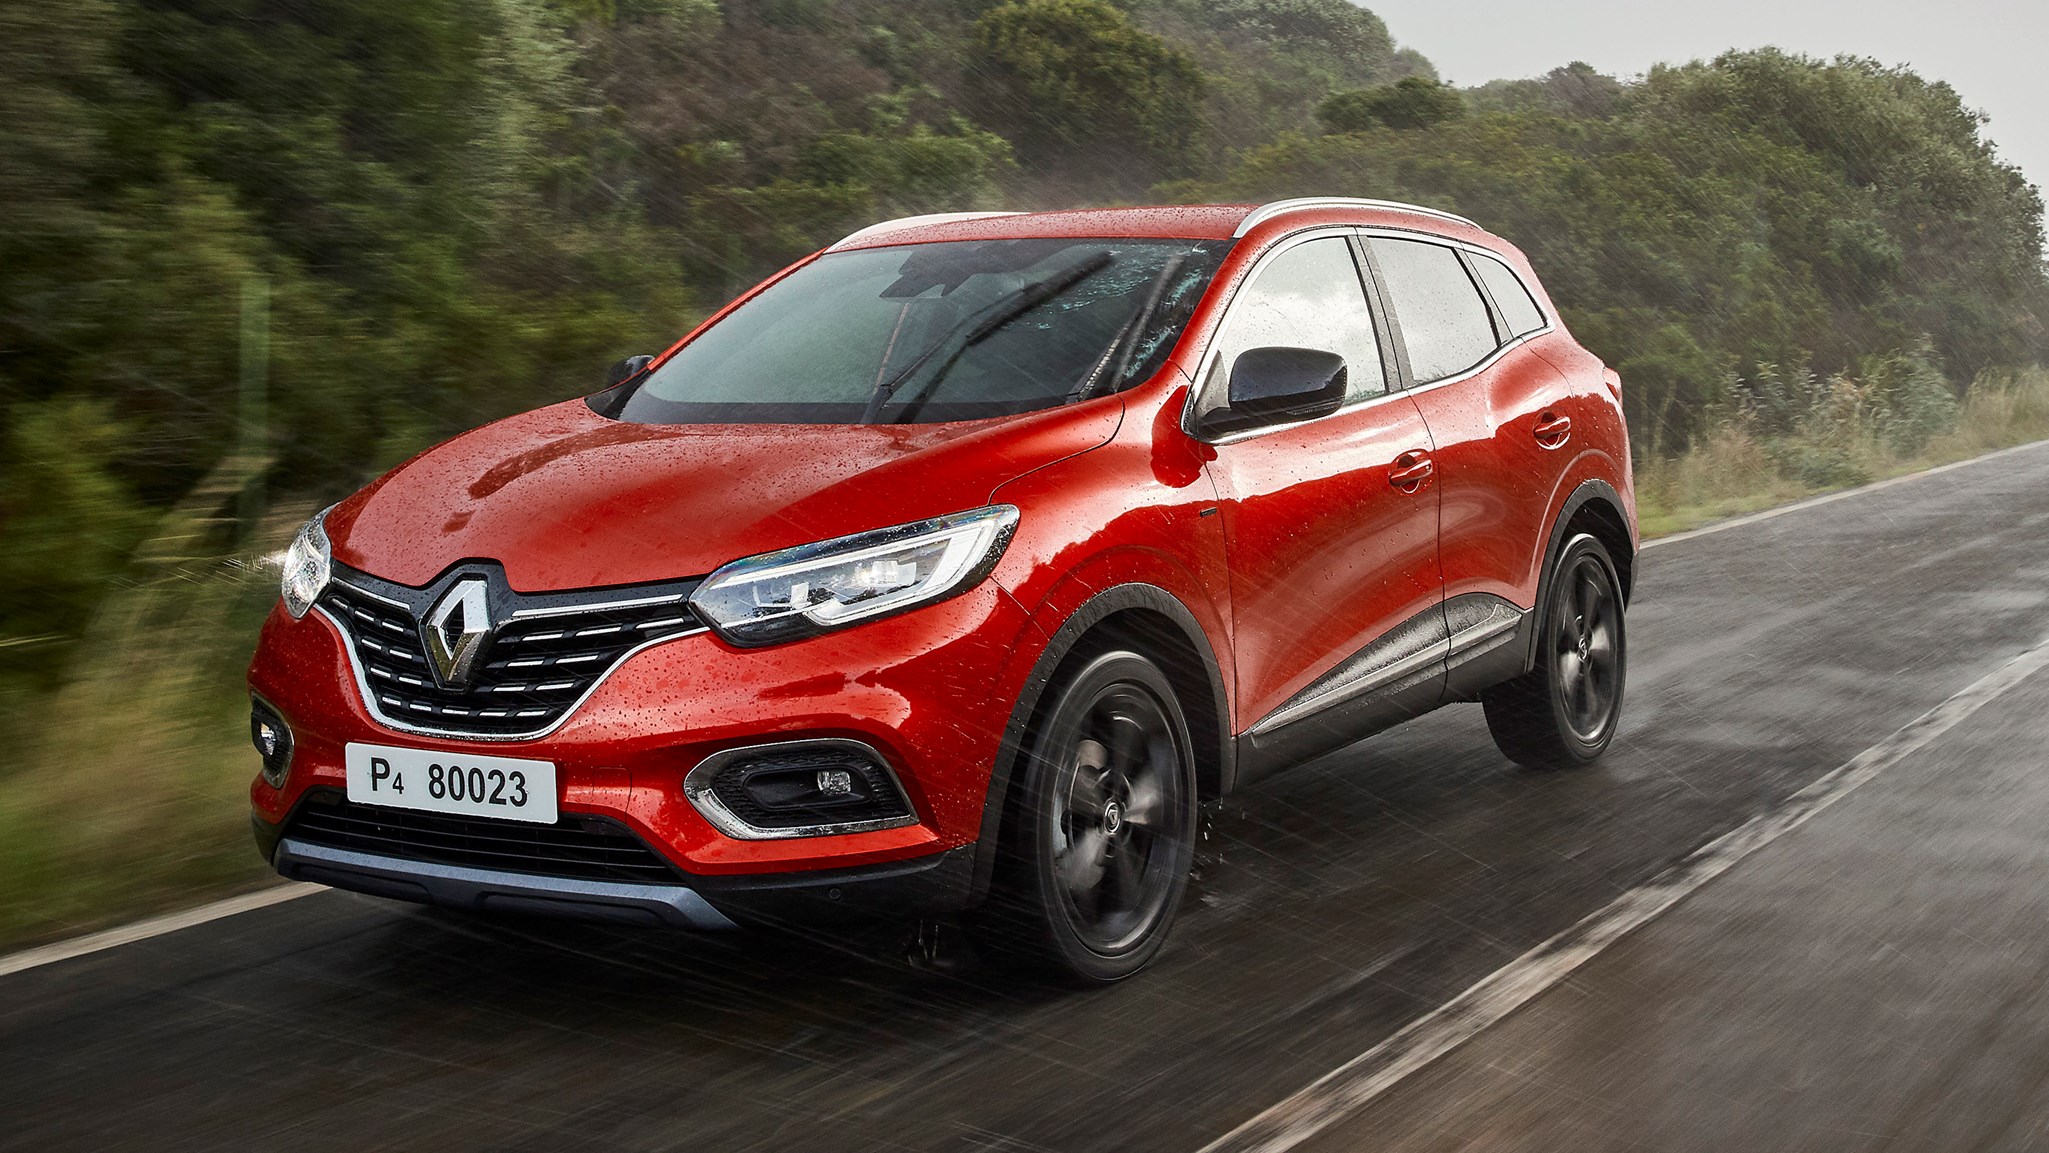 Renault Kadjar SUV (2019) review: blink and you'll miss it | CAR Magazine1752 x 986